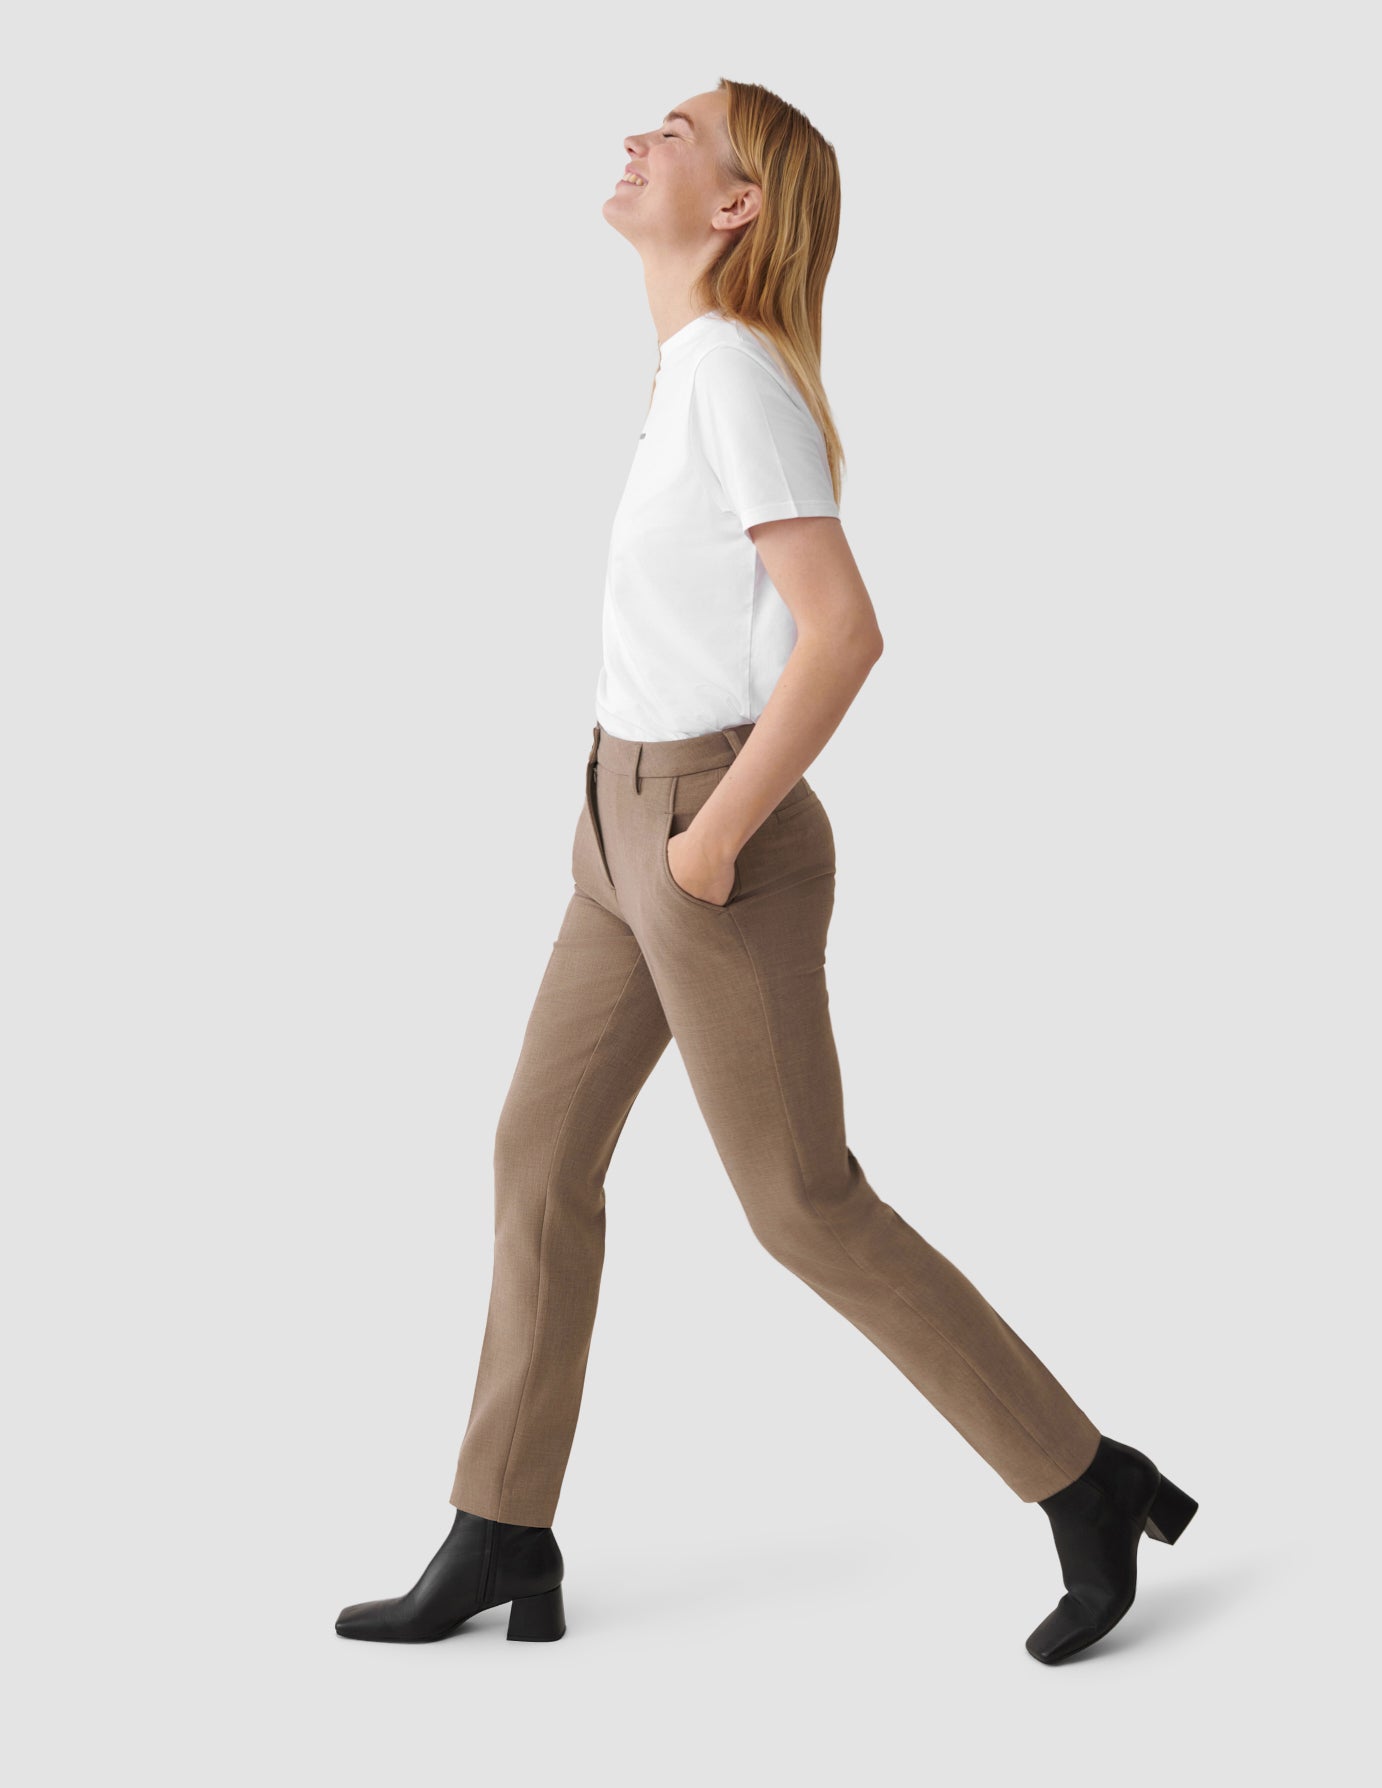 Milepæl Behov for Eastern Women No. 1 Pants Cappuccino | SHAPING NEW TOMORROW